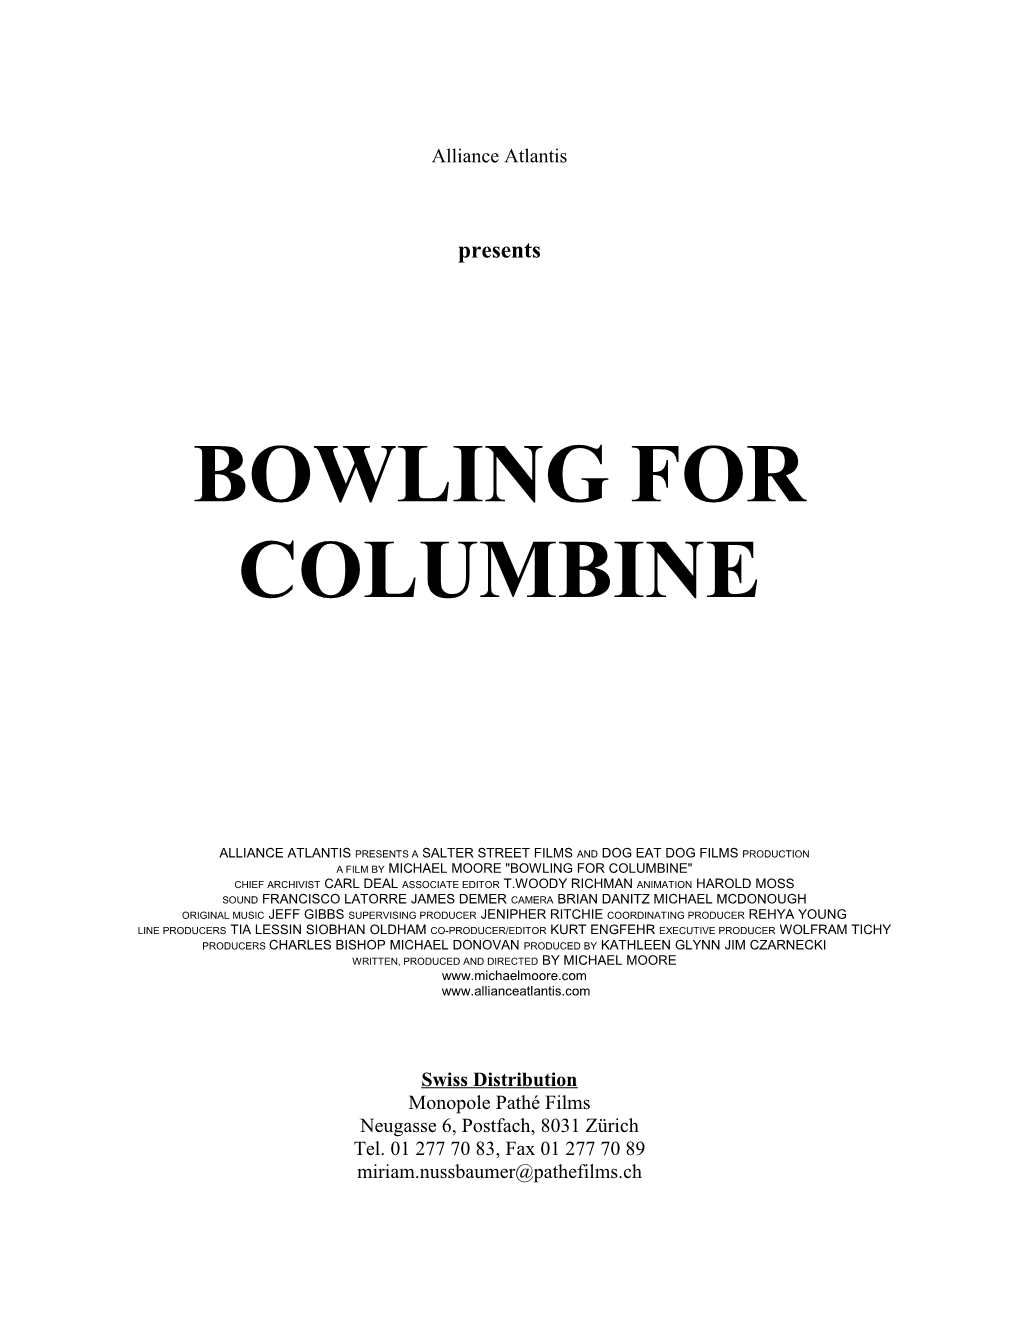 Bowling for Columbine Is a Tour De Force from Award-Winning Filmmaker Michael Moore And